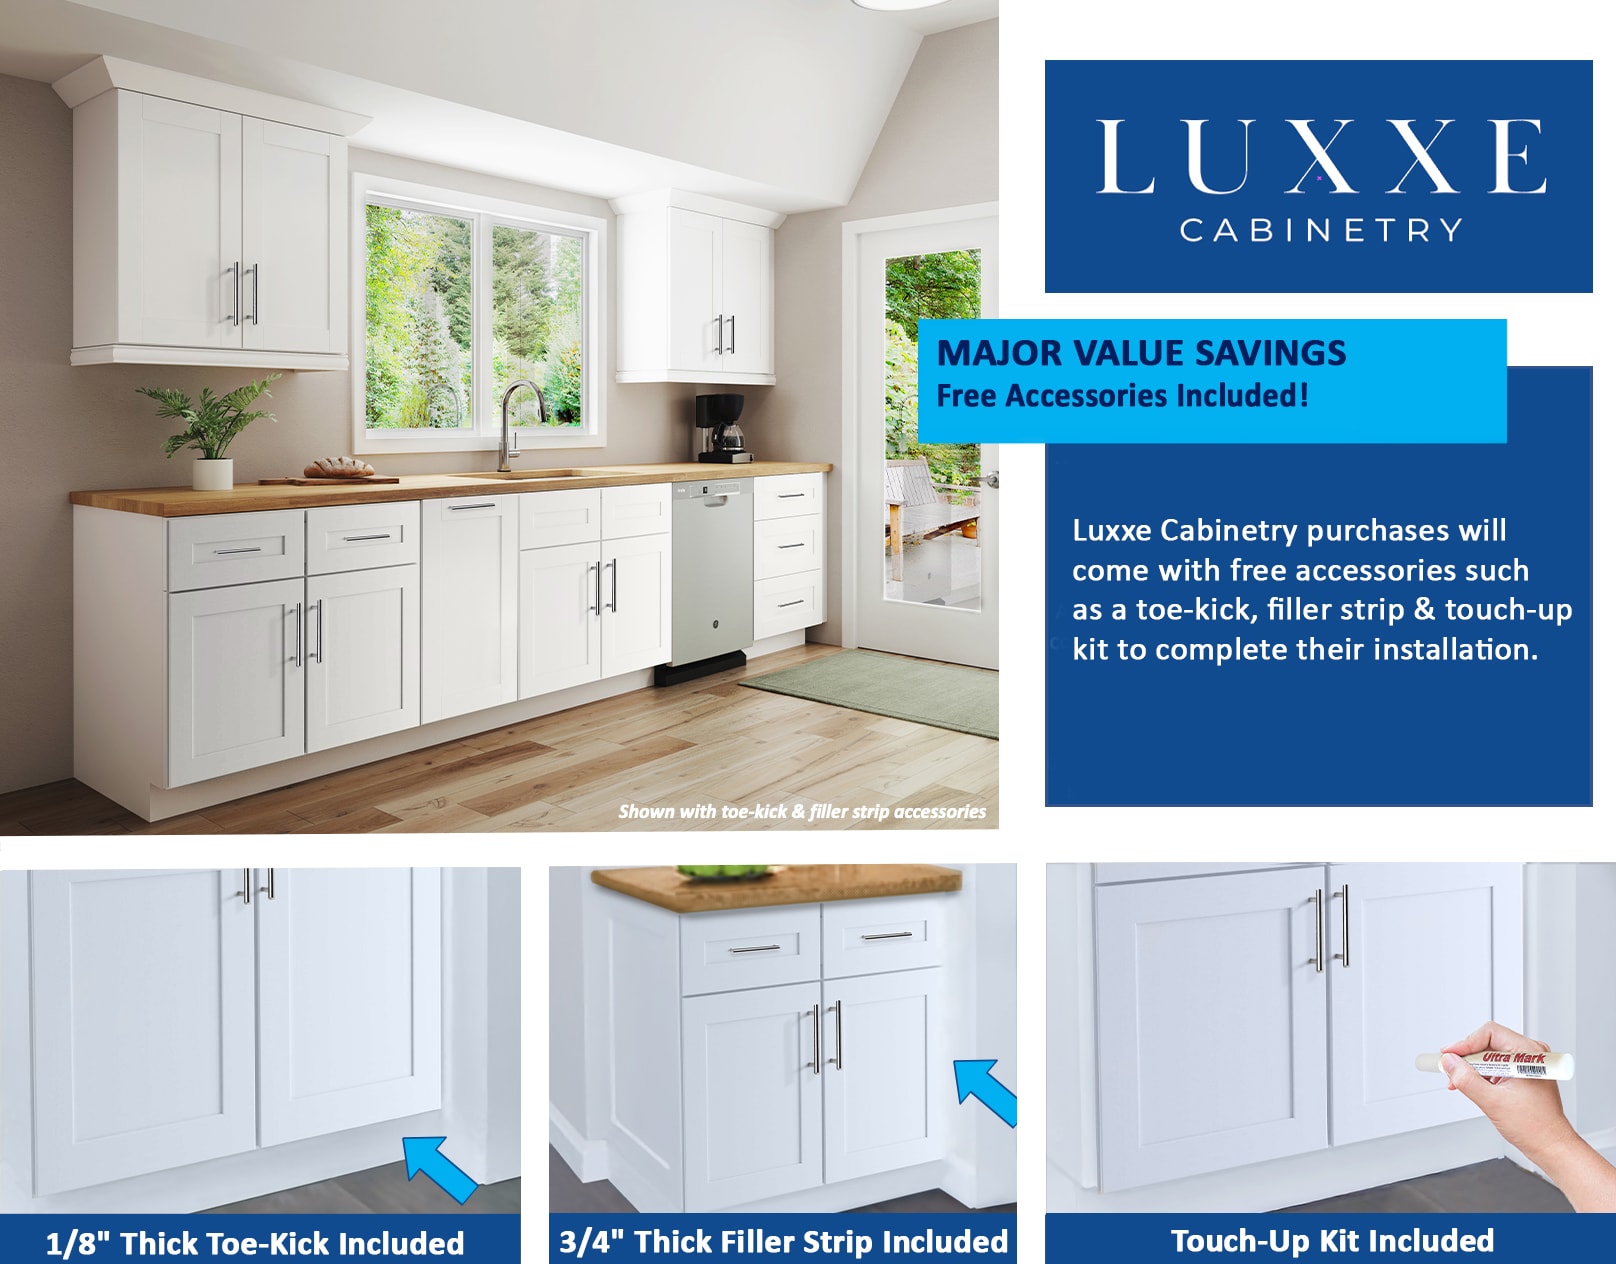 Shaker Cabinets - Cabinets Express